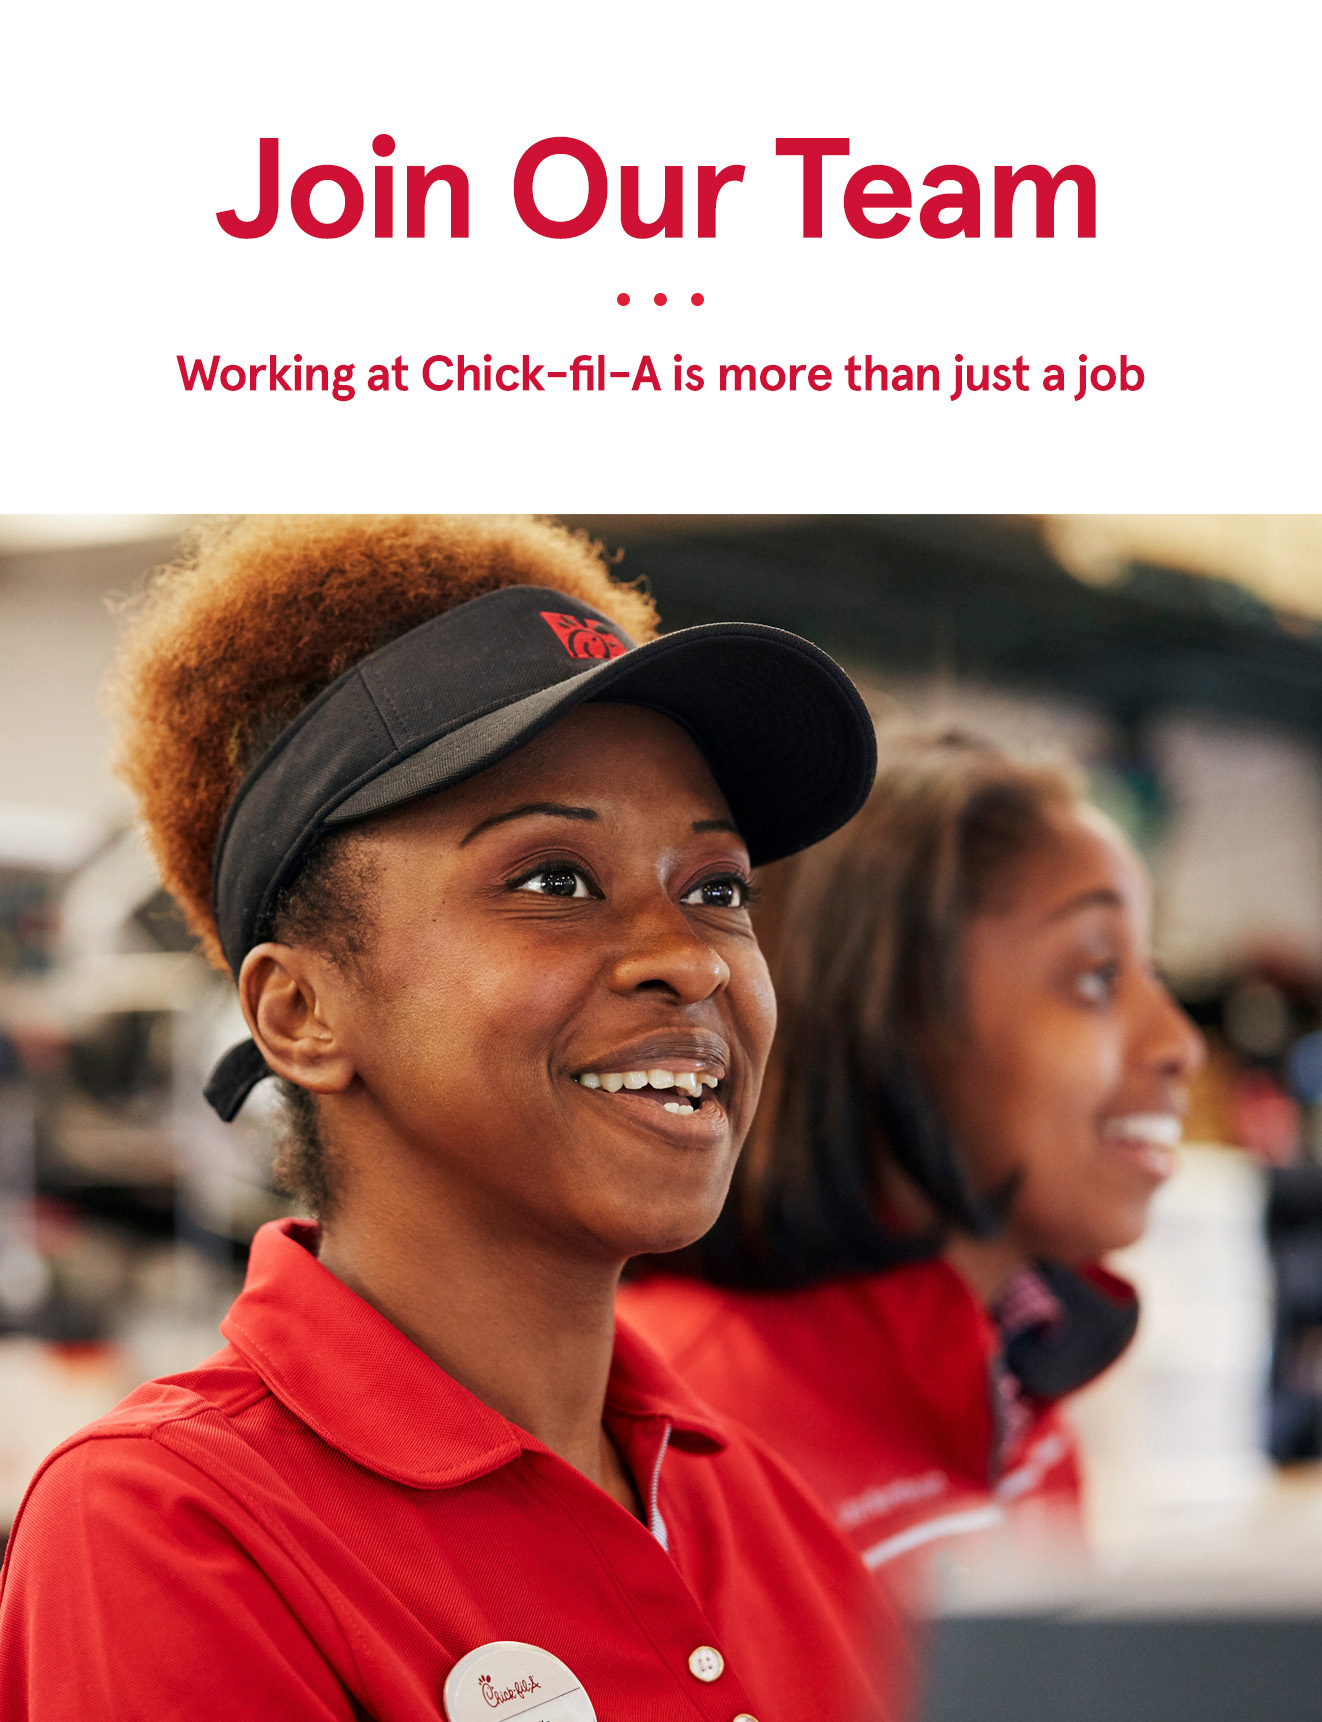 Chick-fil-A Operator Website - Home Page chick-fil-a near me hiring